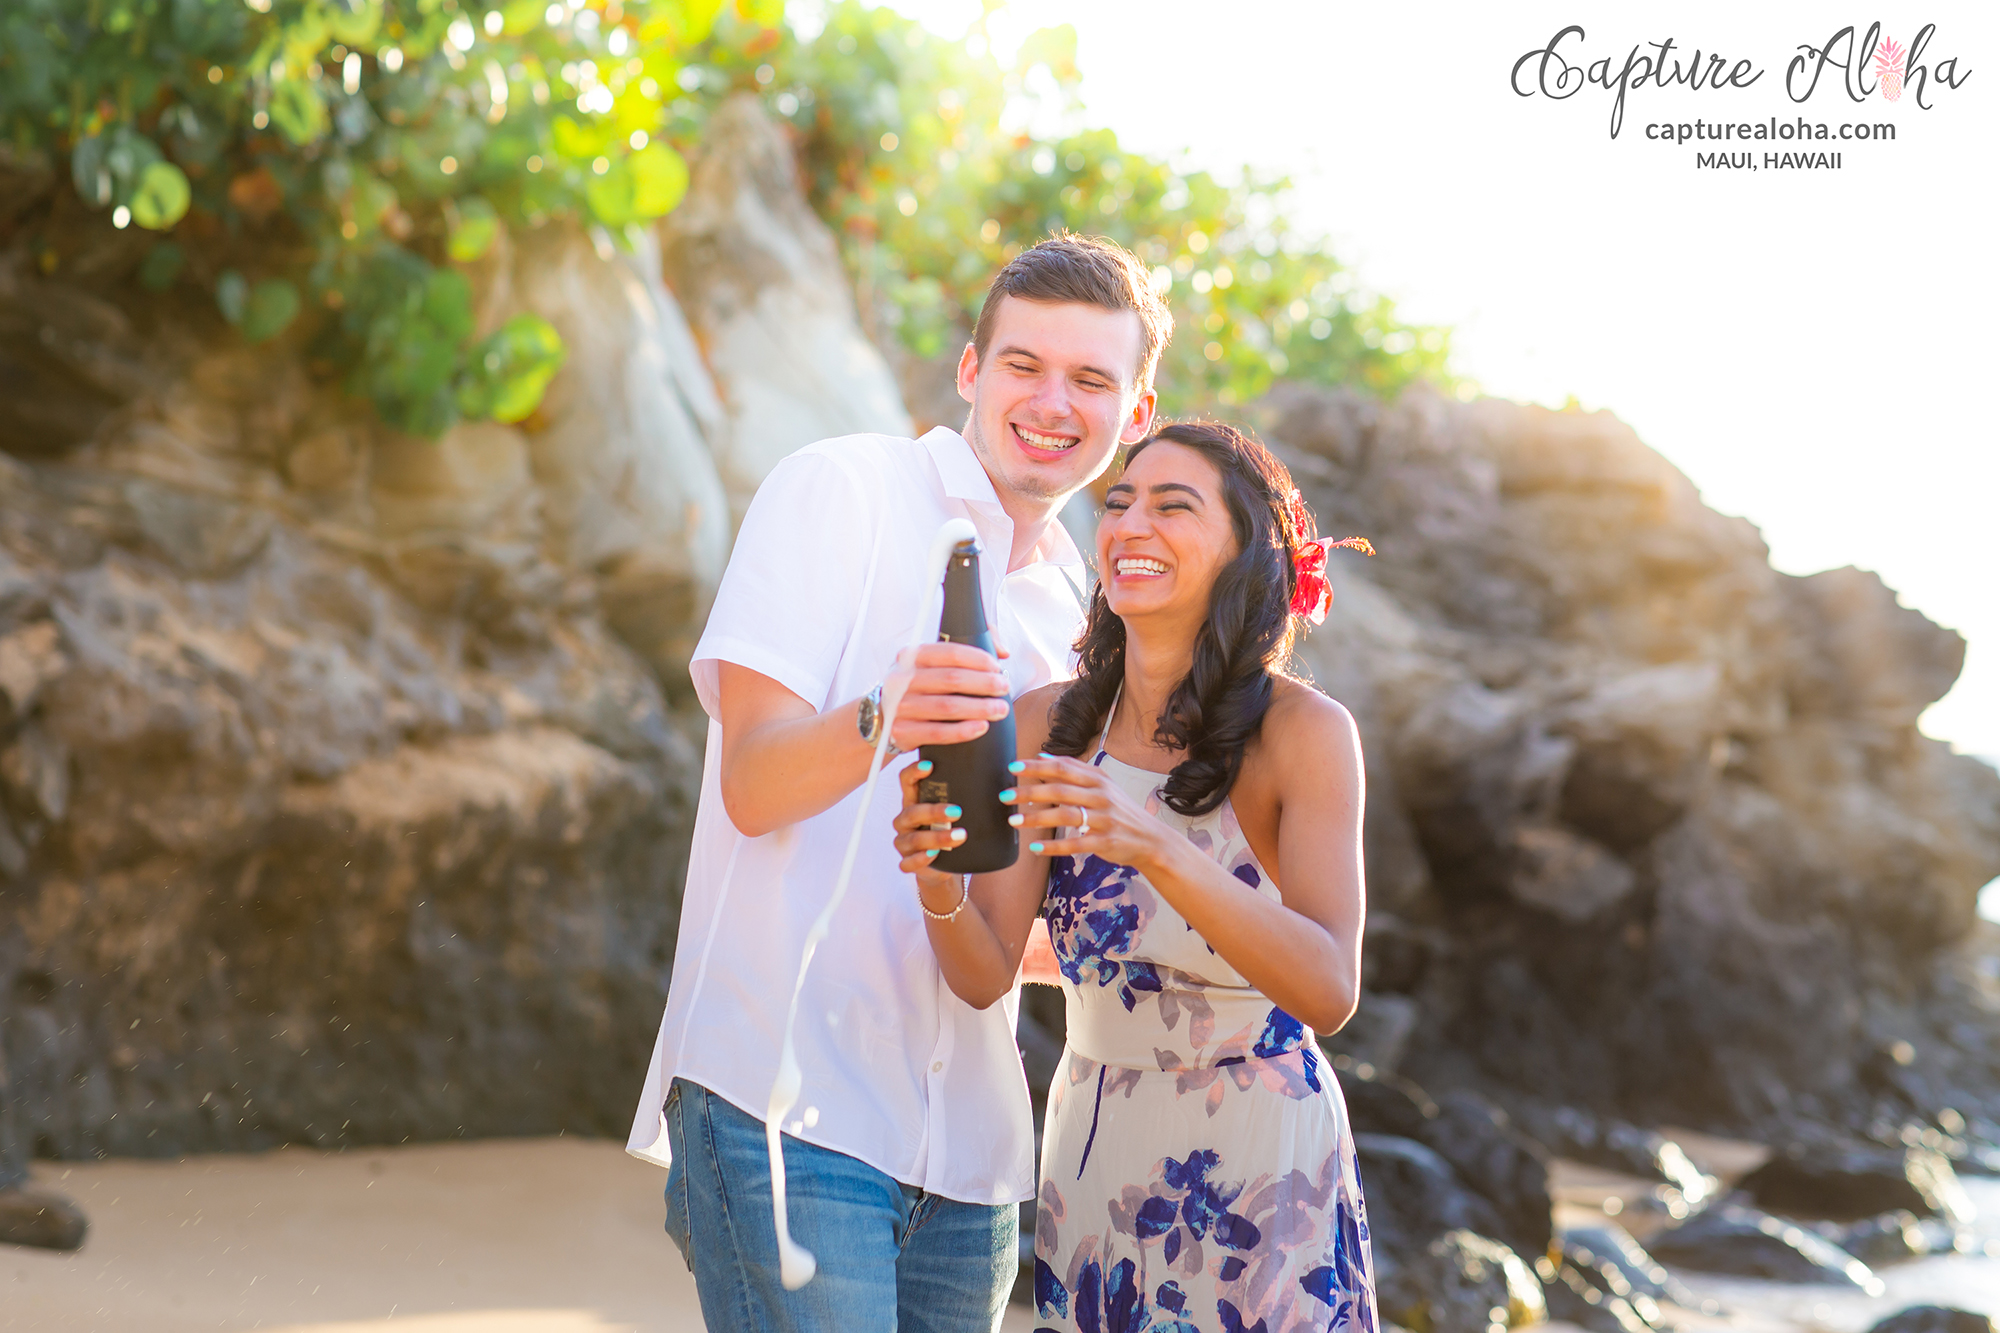 Maui couples portraits at Kapalua with couple celebrating engagement with champagne on the beach